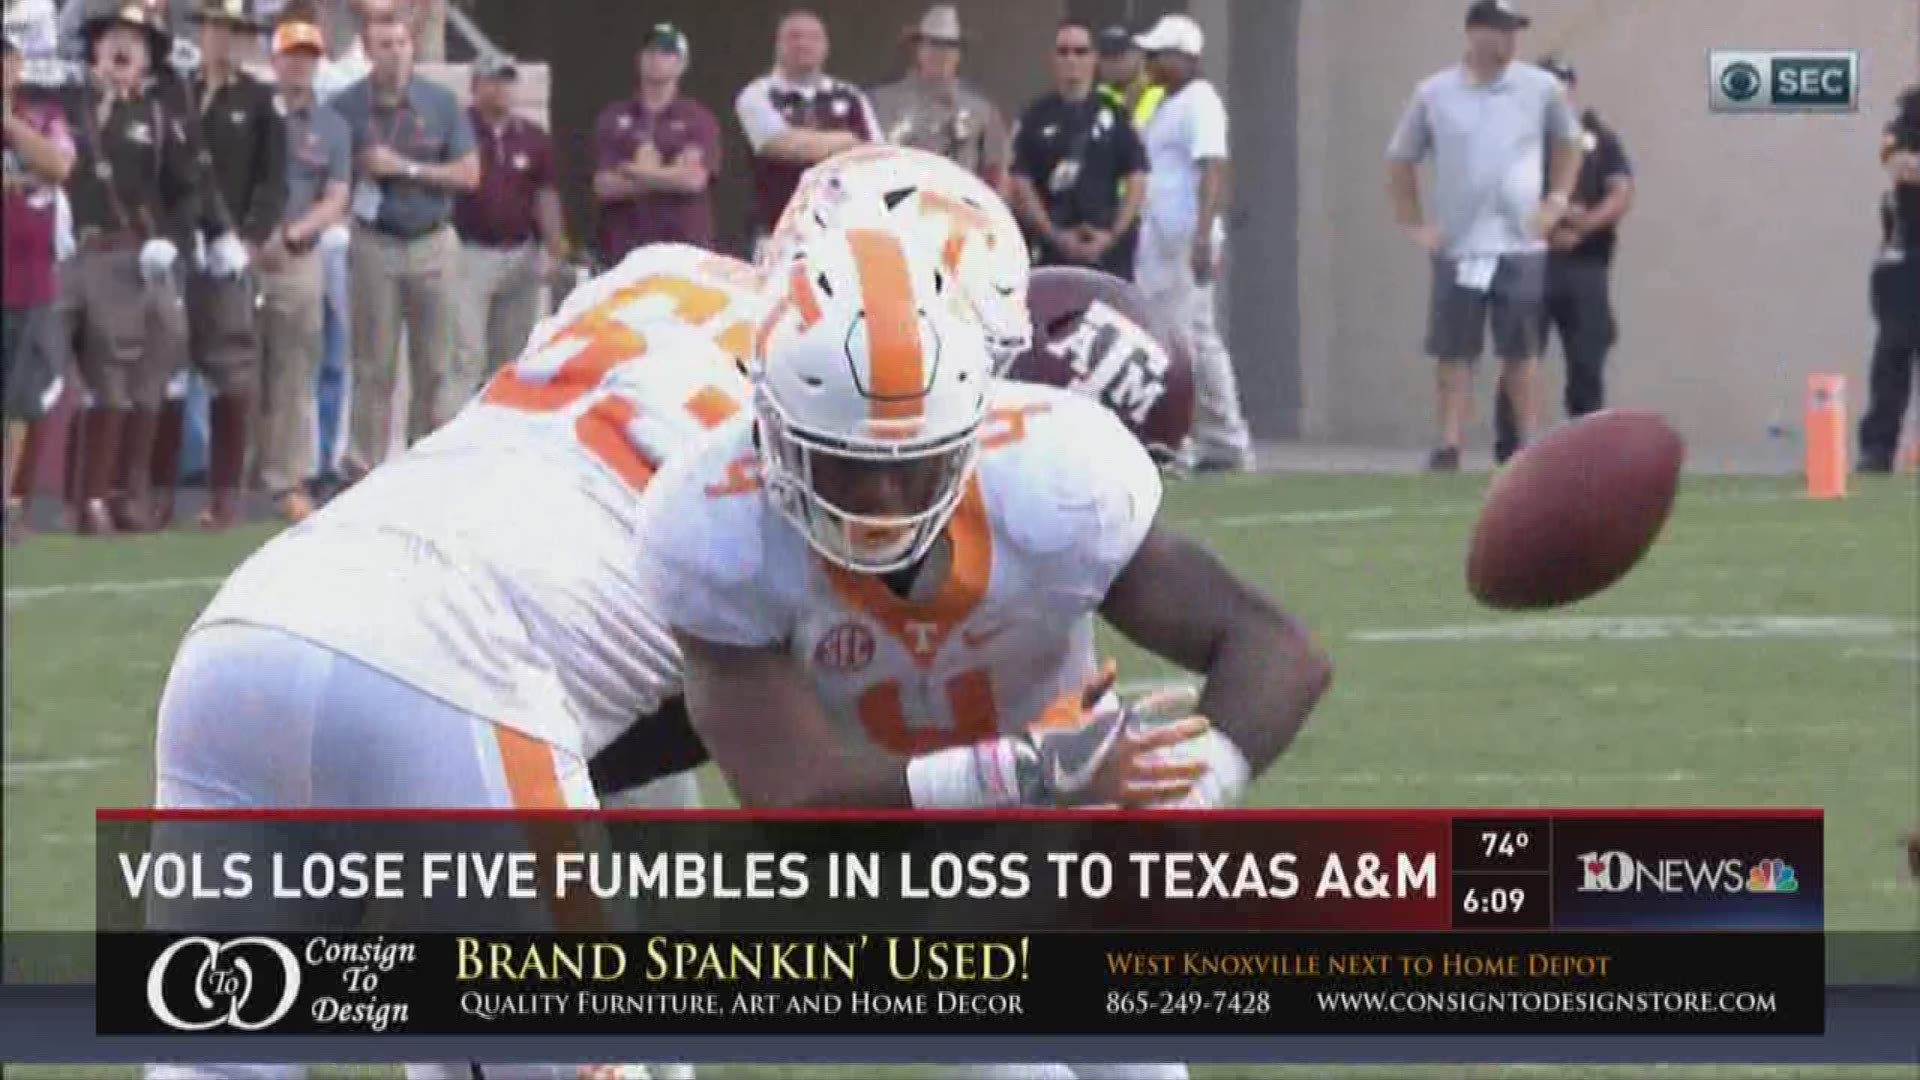 Tennessee lost five fumbles against Texas A&M and leads the nation with 21 fumbles.